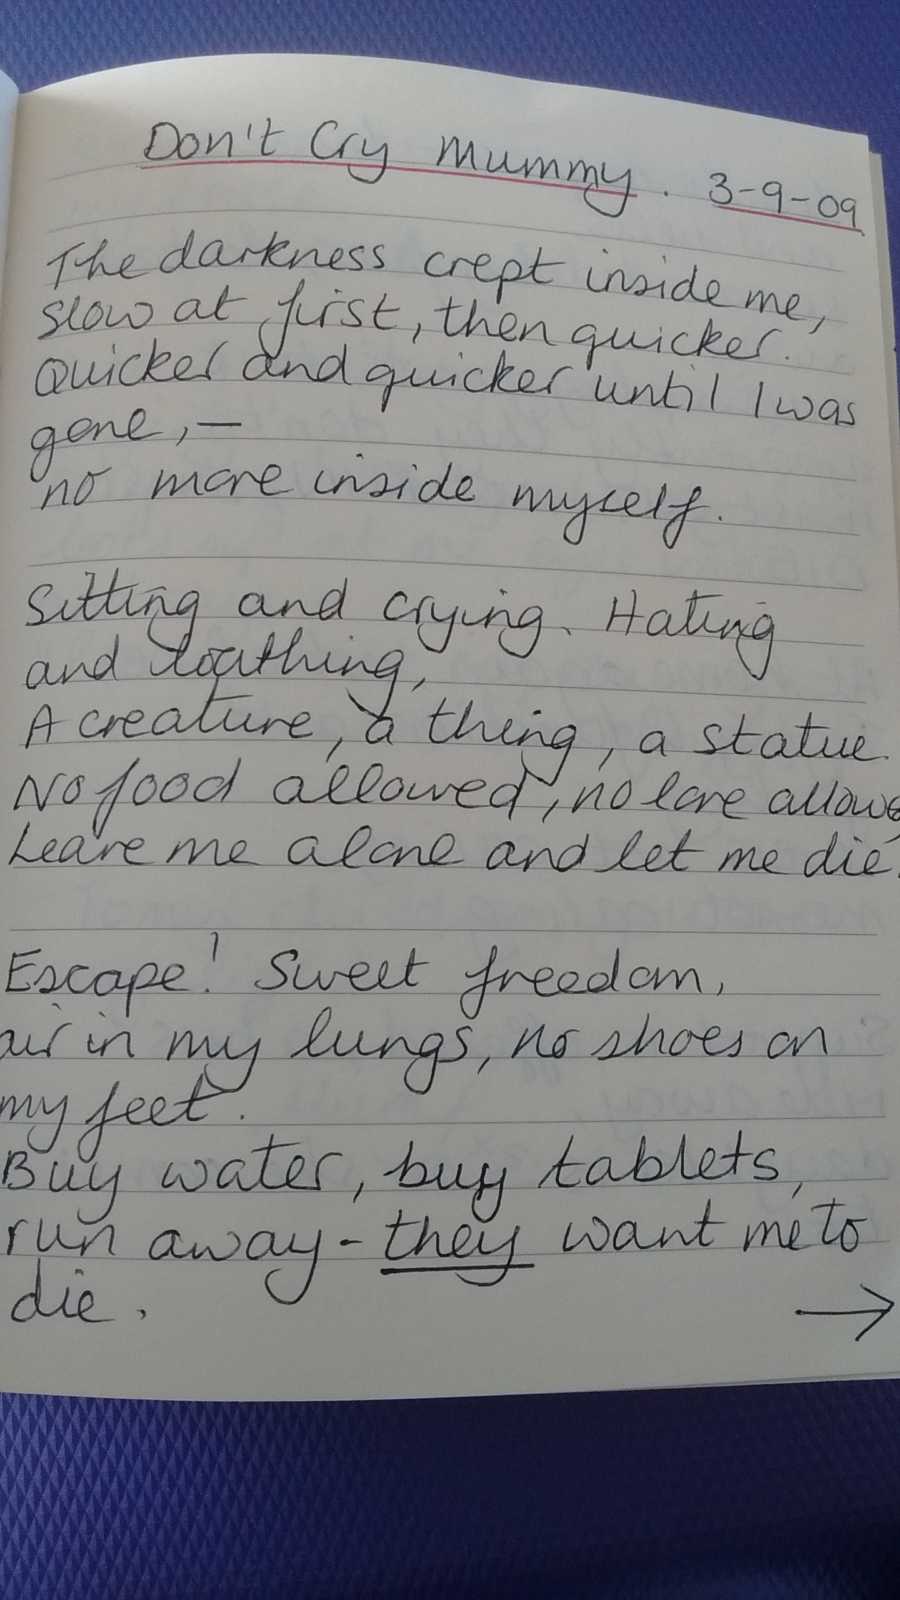 Page of notebook filled with writing from mother who is depressed